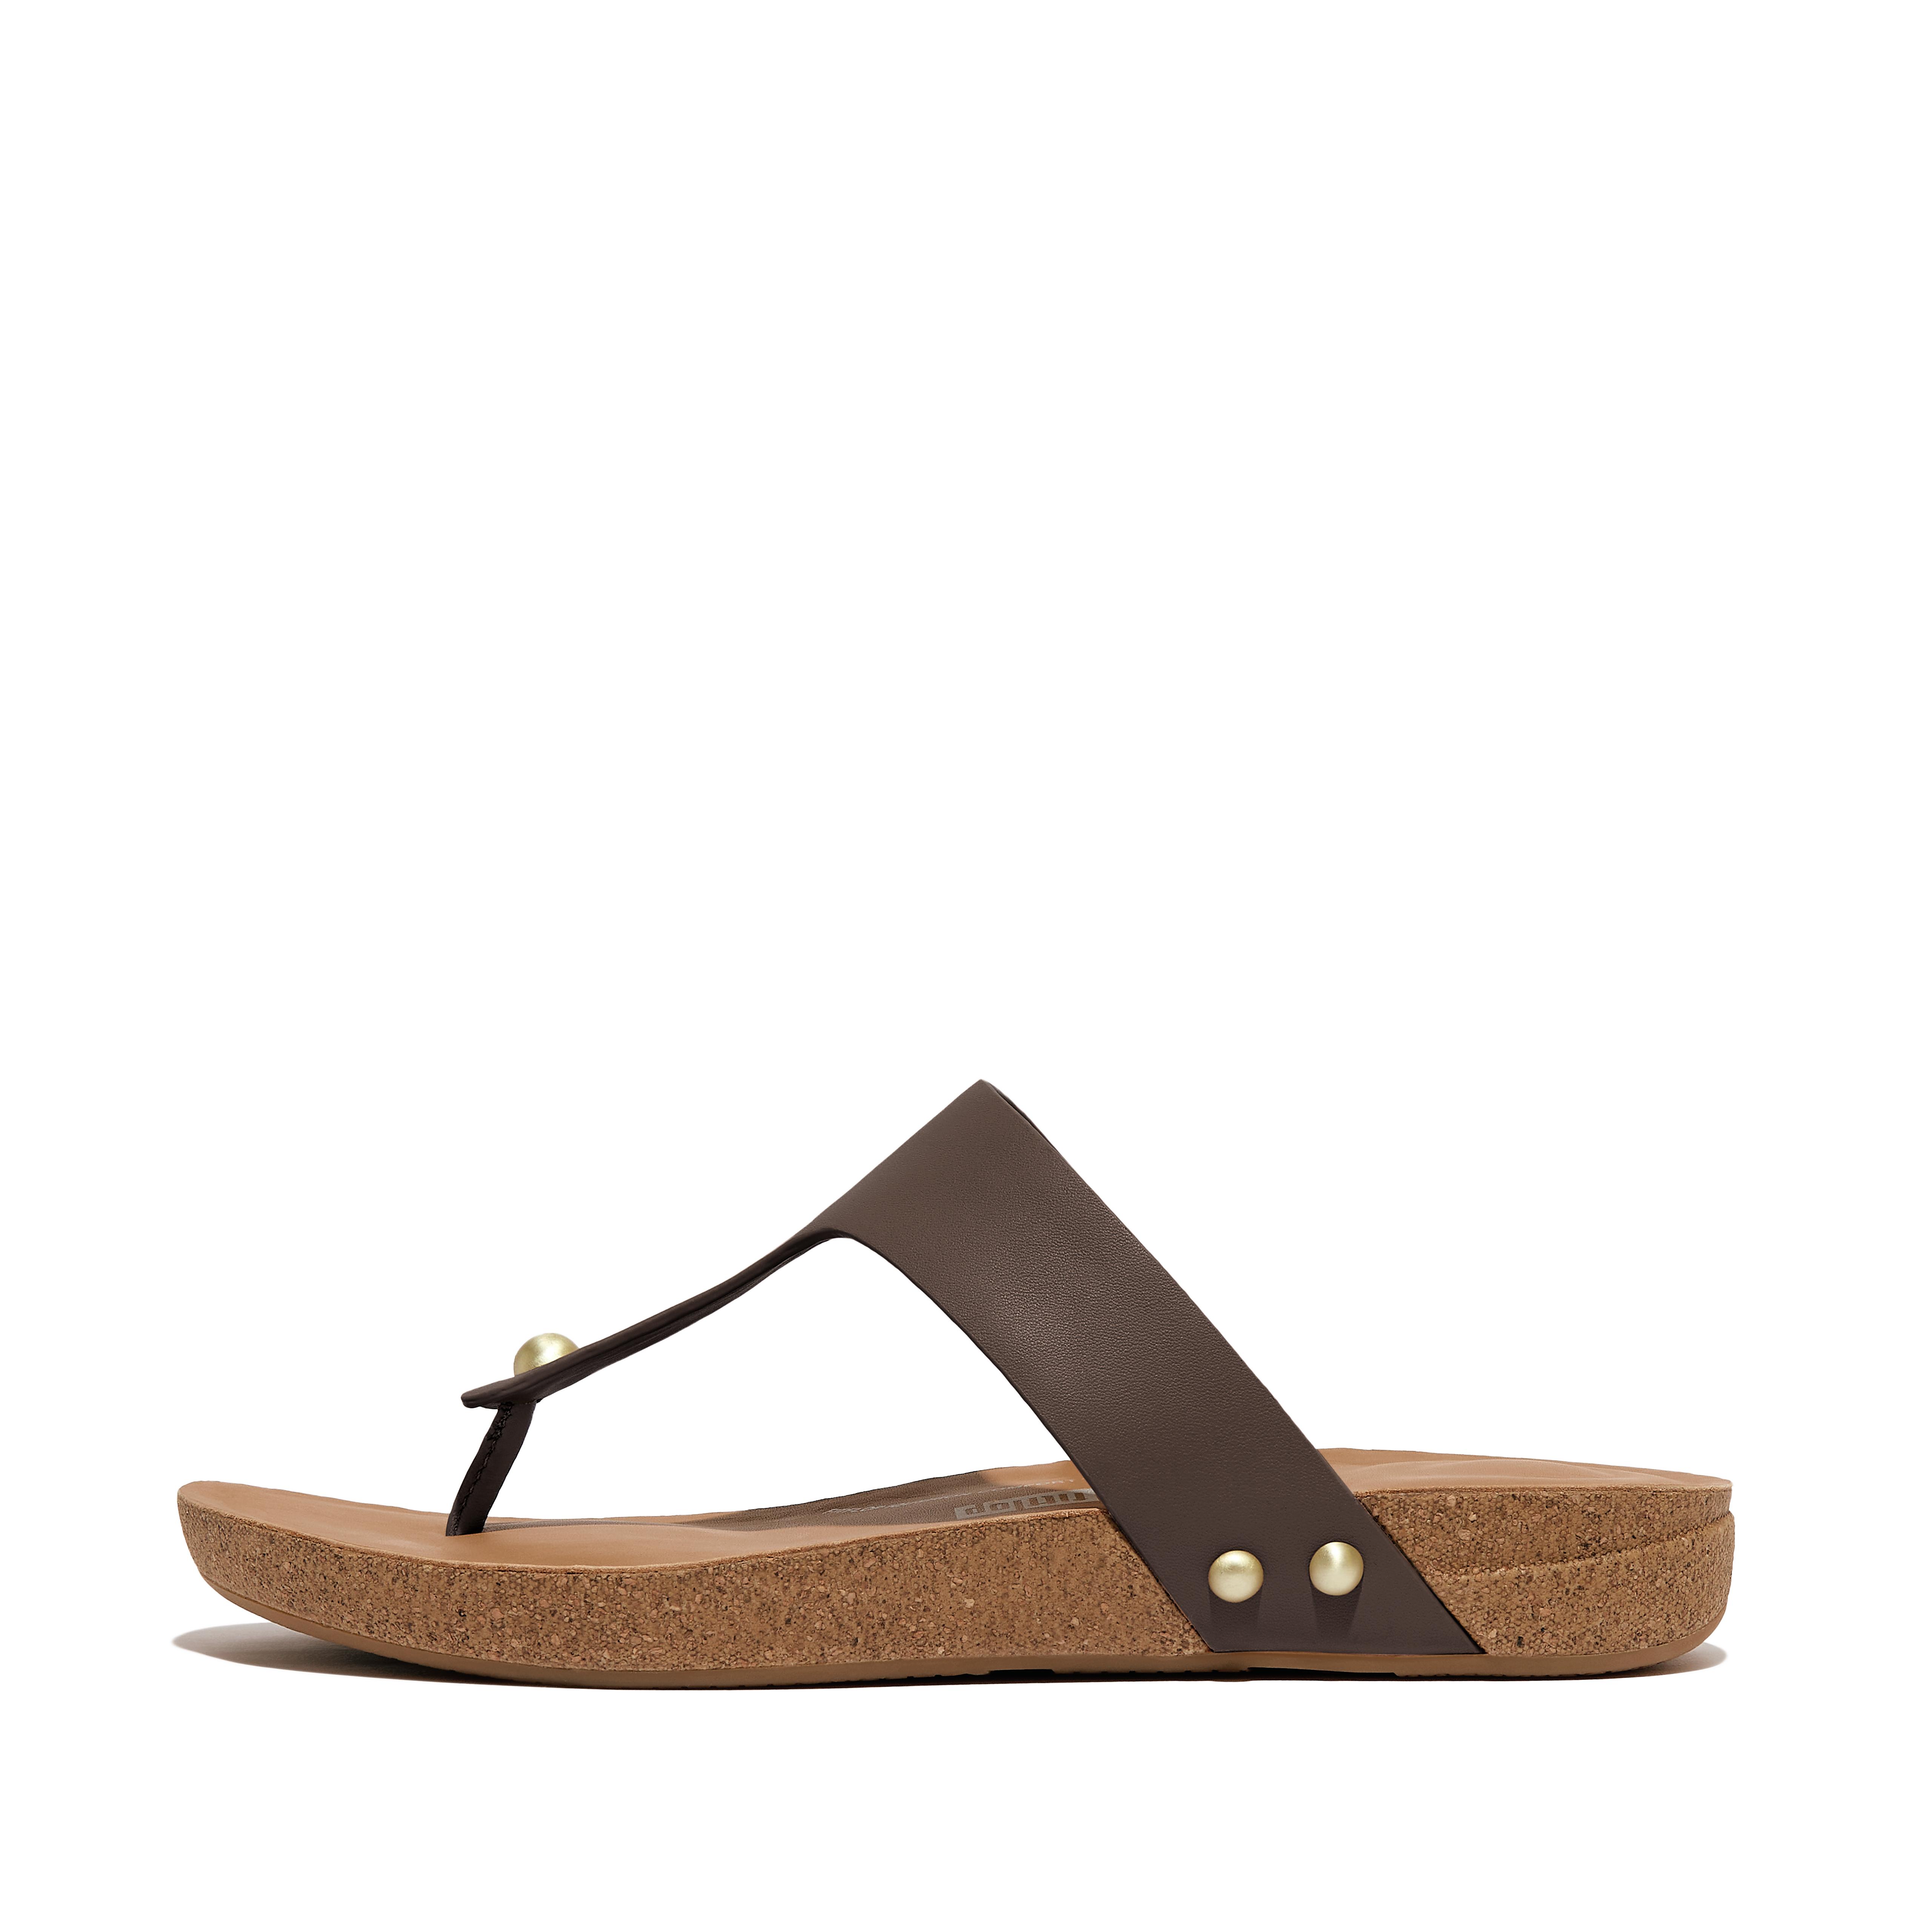 Fitflop Leather Toe-Post Sandals,Brown Mix